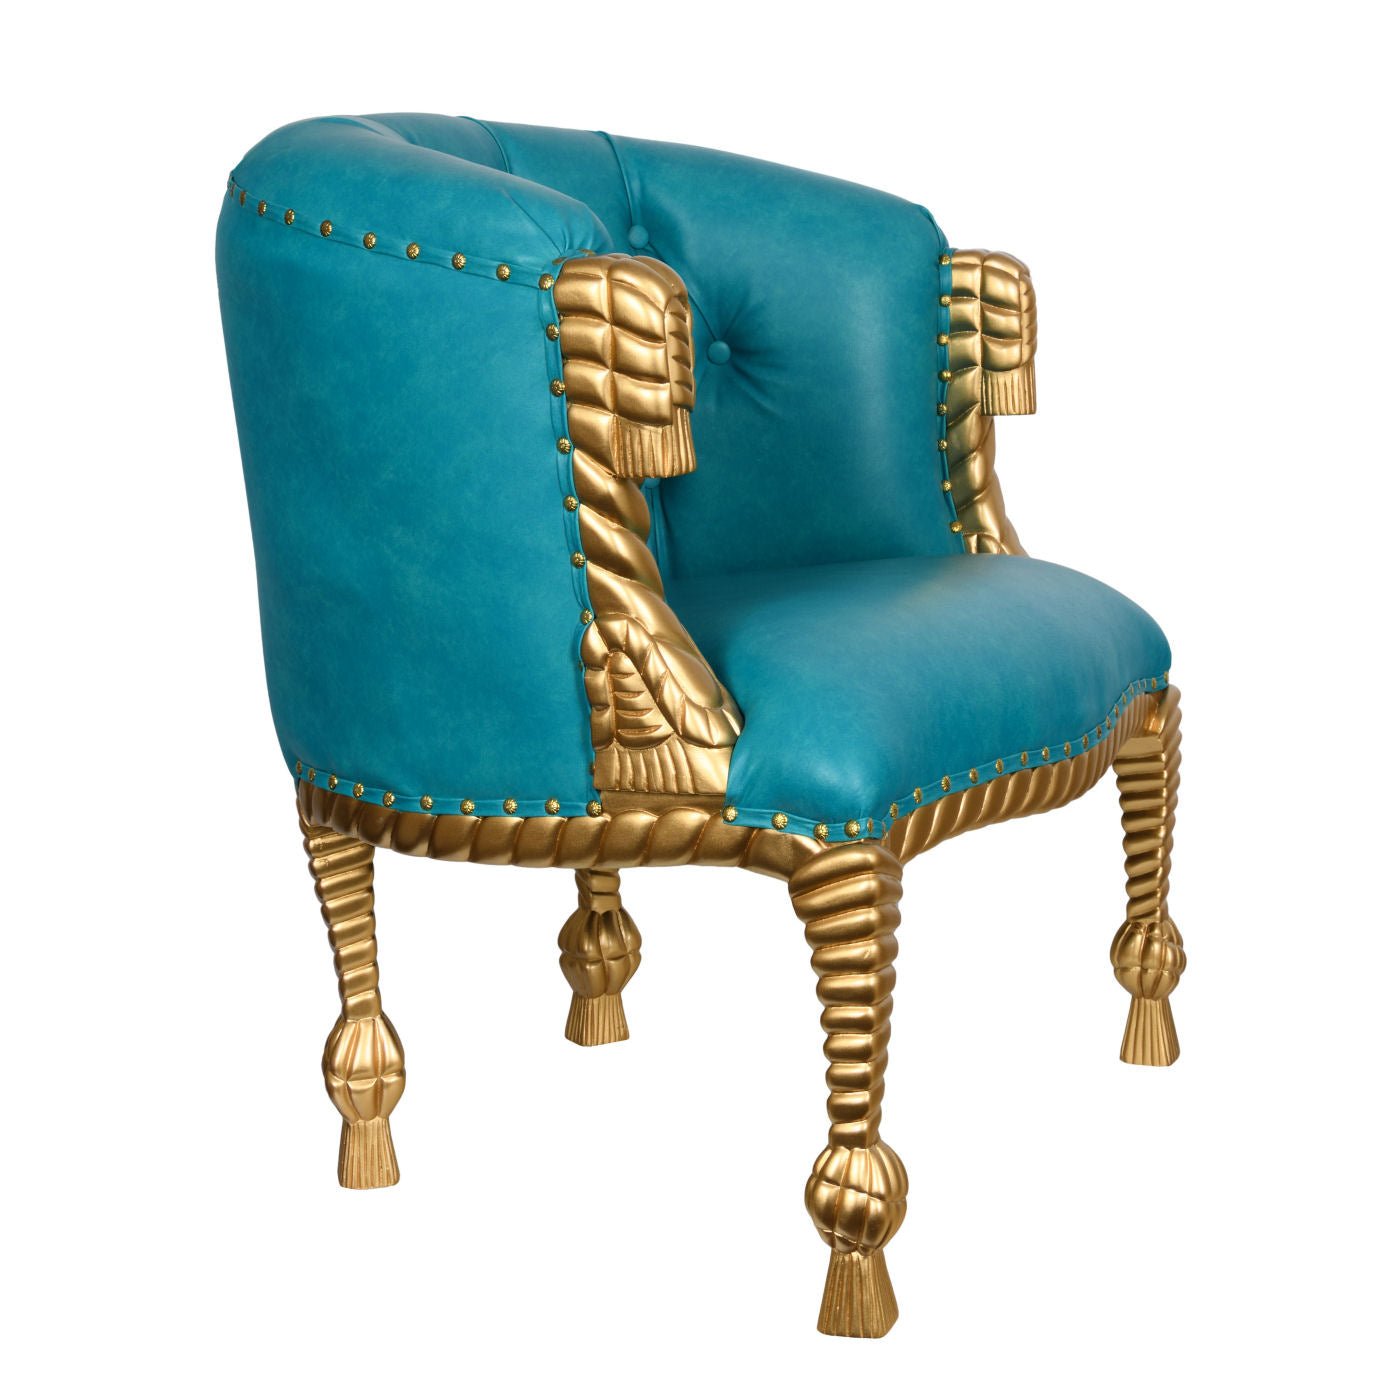 Pool Blue & Gold Mahogany Heavy Carved Armchair - |VESIMI Design| Luxury Bathrooms and Home Decor